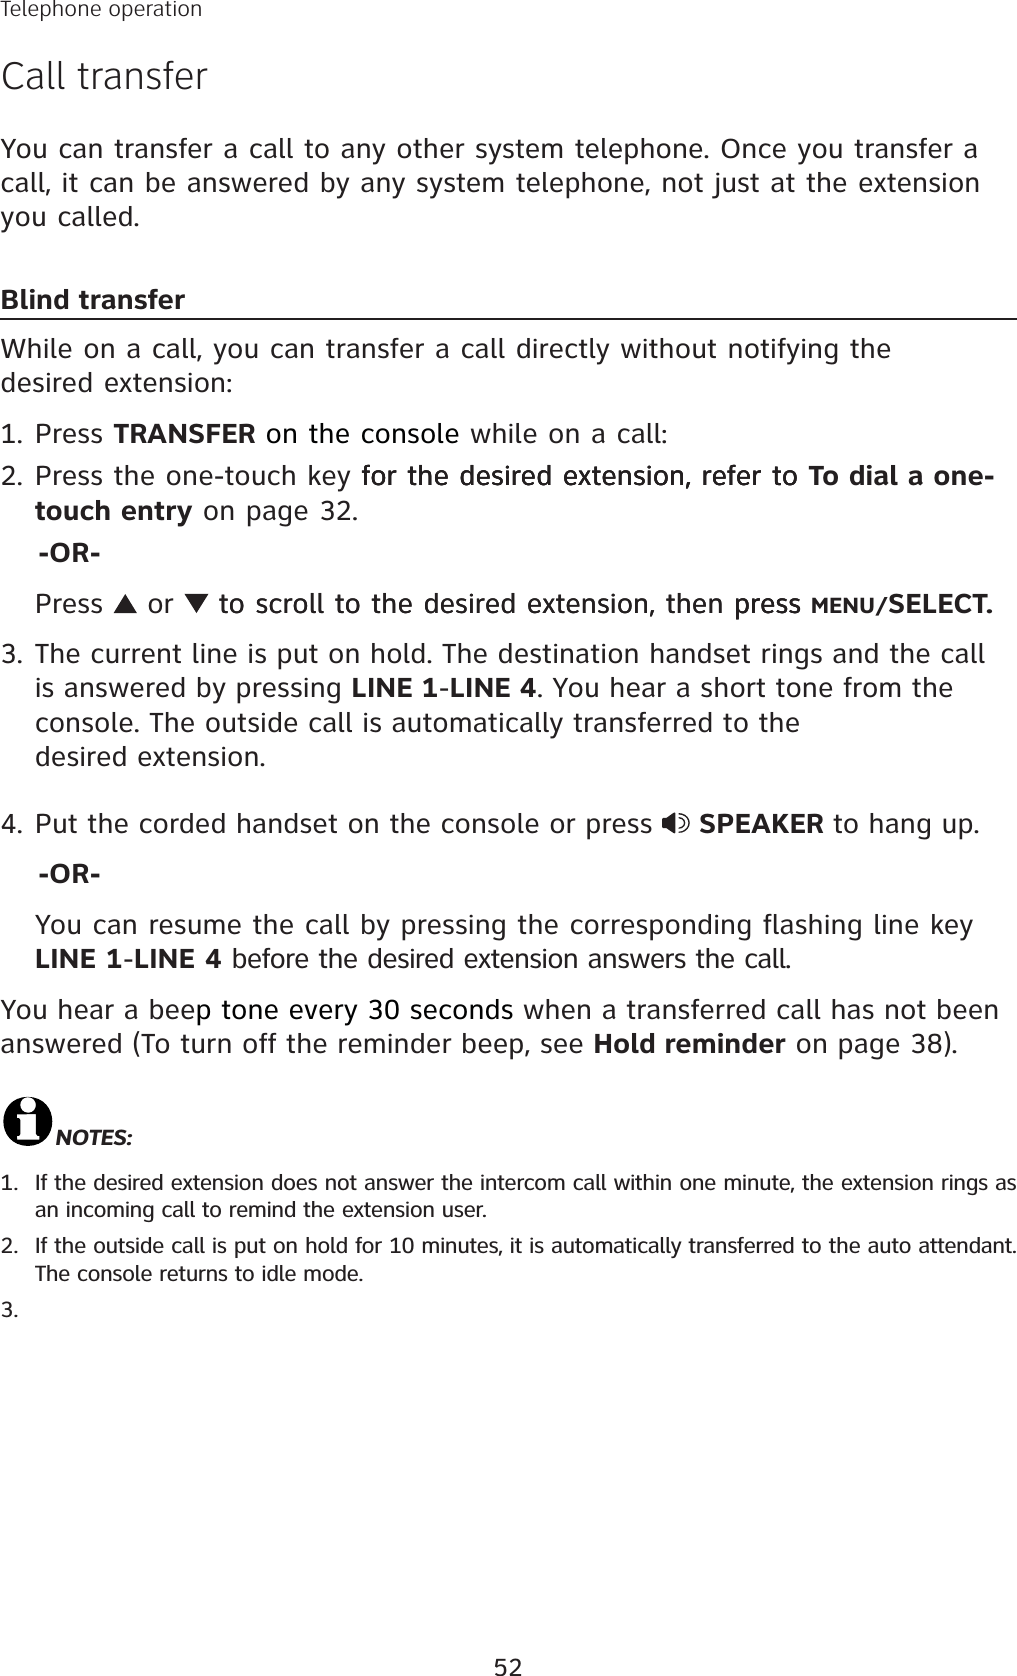 52Telephone operationCall transferYou can transfer a call to any other system telephone. Once you transfer a call, it can be answered by any system telephone, not just at the extension you called. Blind transferWhile on a call, you can transfer a call directly without notifying the desired extension:Press TRANSFER on the console while on a call:Press the one-touch key for the desired extension, refer tofor the desired extension, refer tofor the desired extension, refer to To dial a one-touch entry on page 32.    -OR-Press   or  to scroll to the desired extension, then pressto scroll to the desired extension, then press press MENU/SELECT.3. The current line is put on hold. The destination handset rings and the call is answered by pressing LINE 1-LINE 4. You hear a short tone from the console. The outside call is automatically transferred to the desired extension. 4. Put the corded handset on the console or press  SPEAKER to hang up.    -OR-You can resume the call by pressing the corresponding flashing line key LINE 1-LINE 4 before the desired extension answers the call.You hear a beep tone every 30 seconds when a transferred call has not been answered (To turn off the reminder beep, see Hold reminder on page 38).NOTES: If the desired extension does not answer the intercom call within one minute, the extension rings as an incoming call to remind the extension user. If the outside call is put on hold for 10 minutes, it is automatically transferred to the auto attendant. The console returns to idle mode. 1.2.1.2.3.